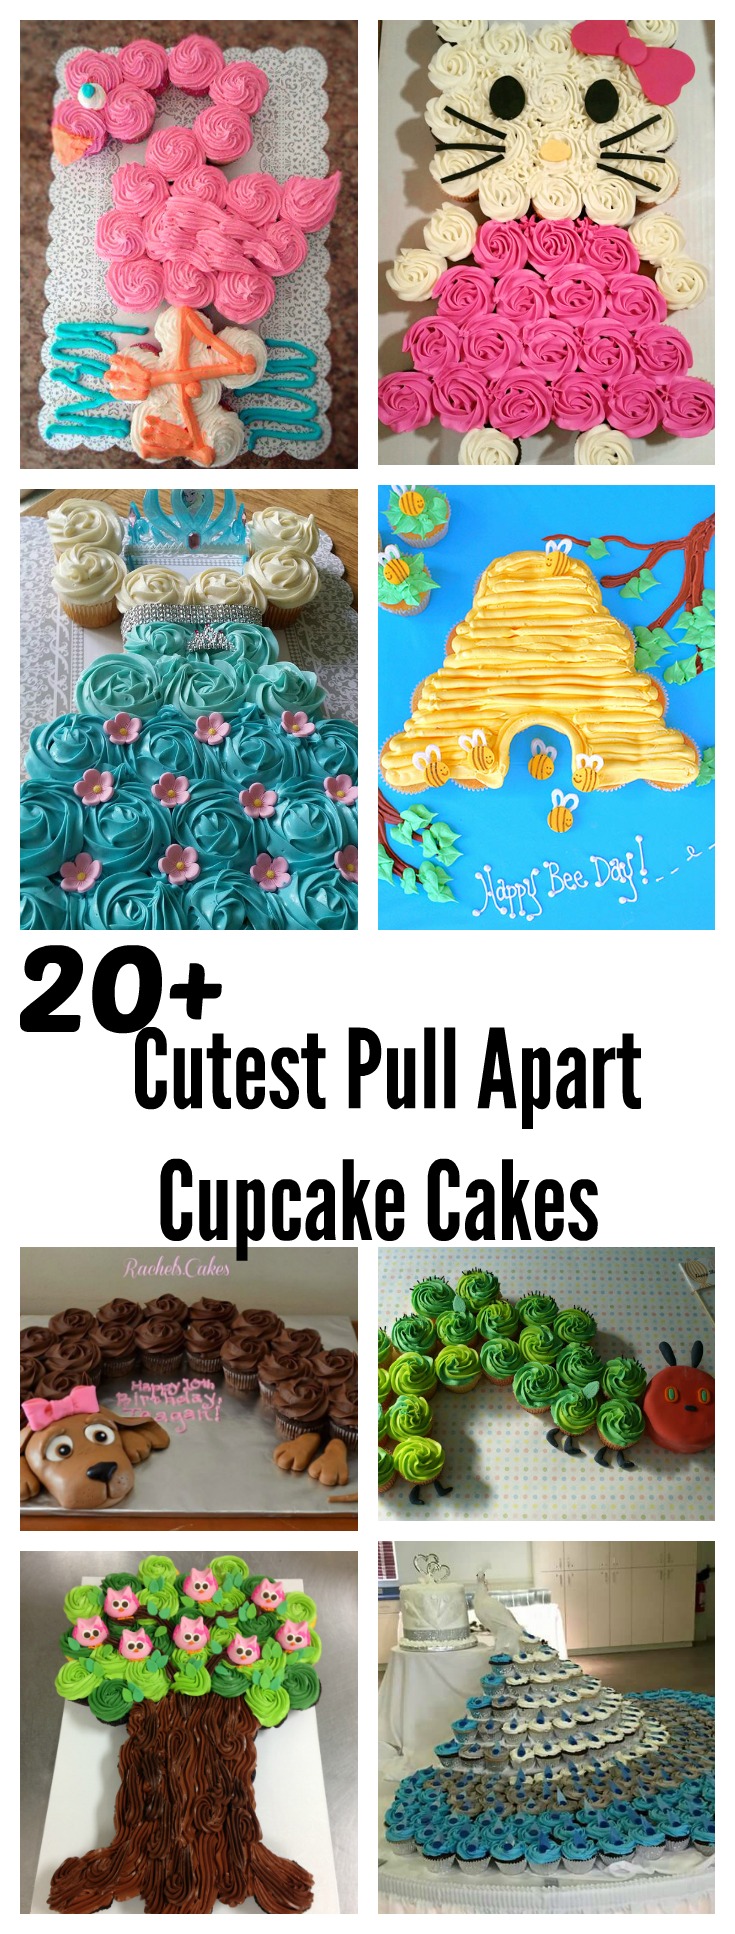 20+ Cutest and Most Creative Pull Apart Cupcake Cakes m